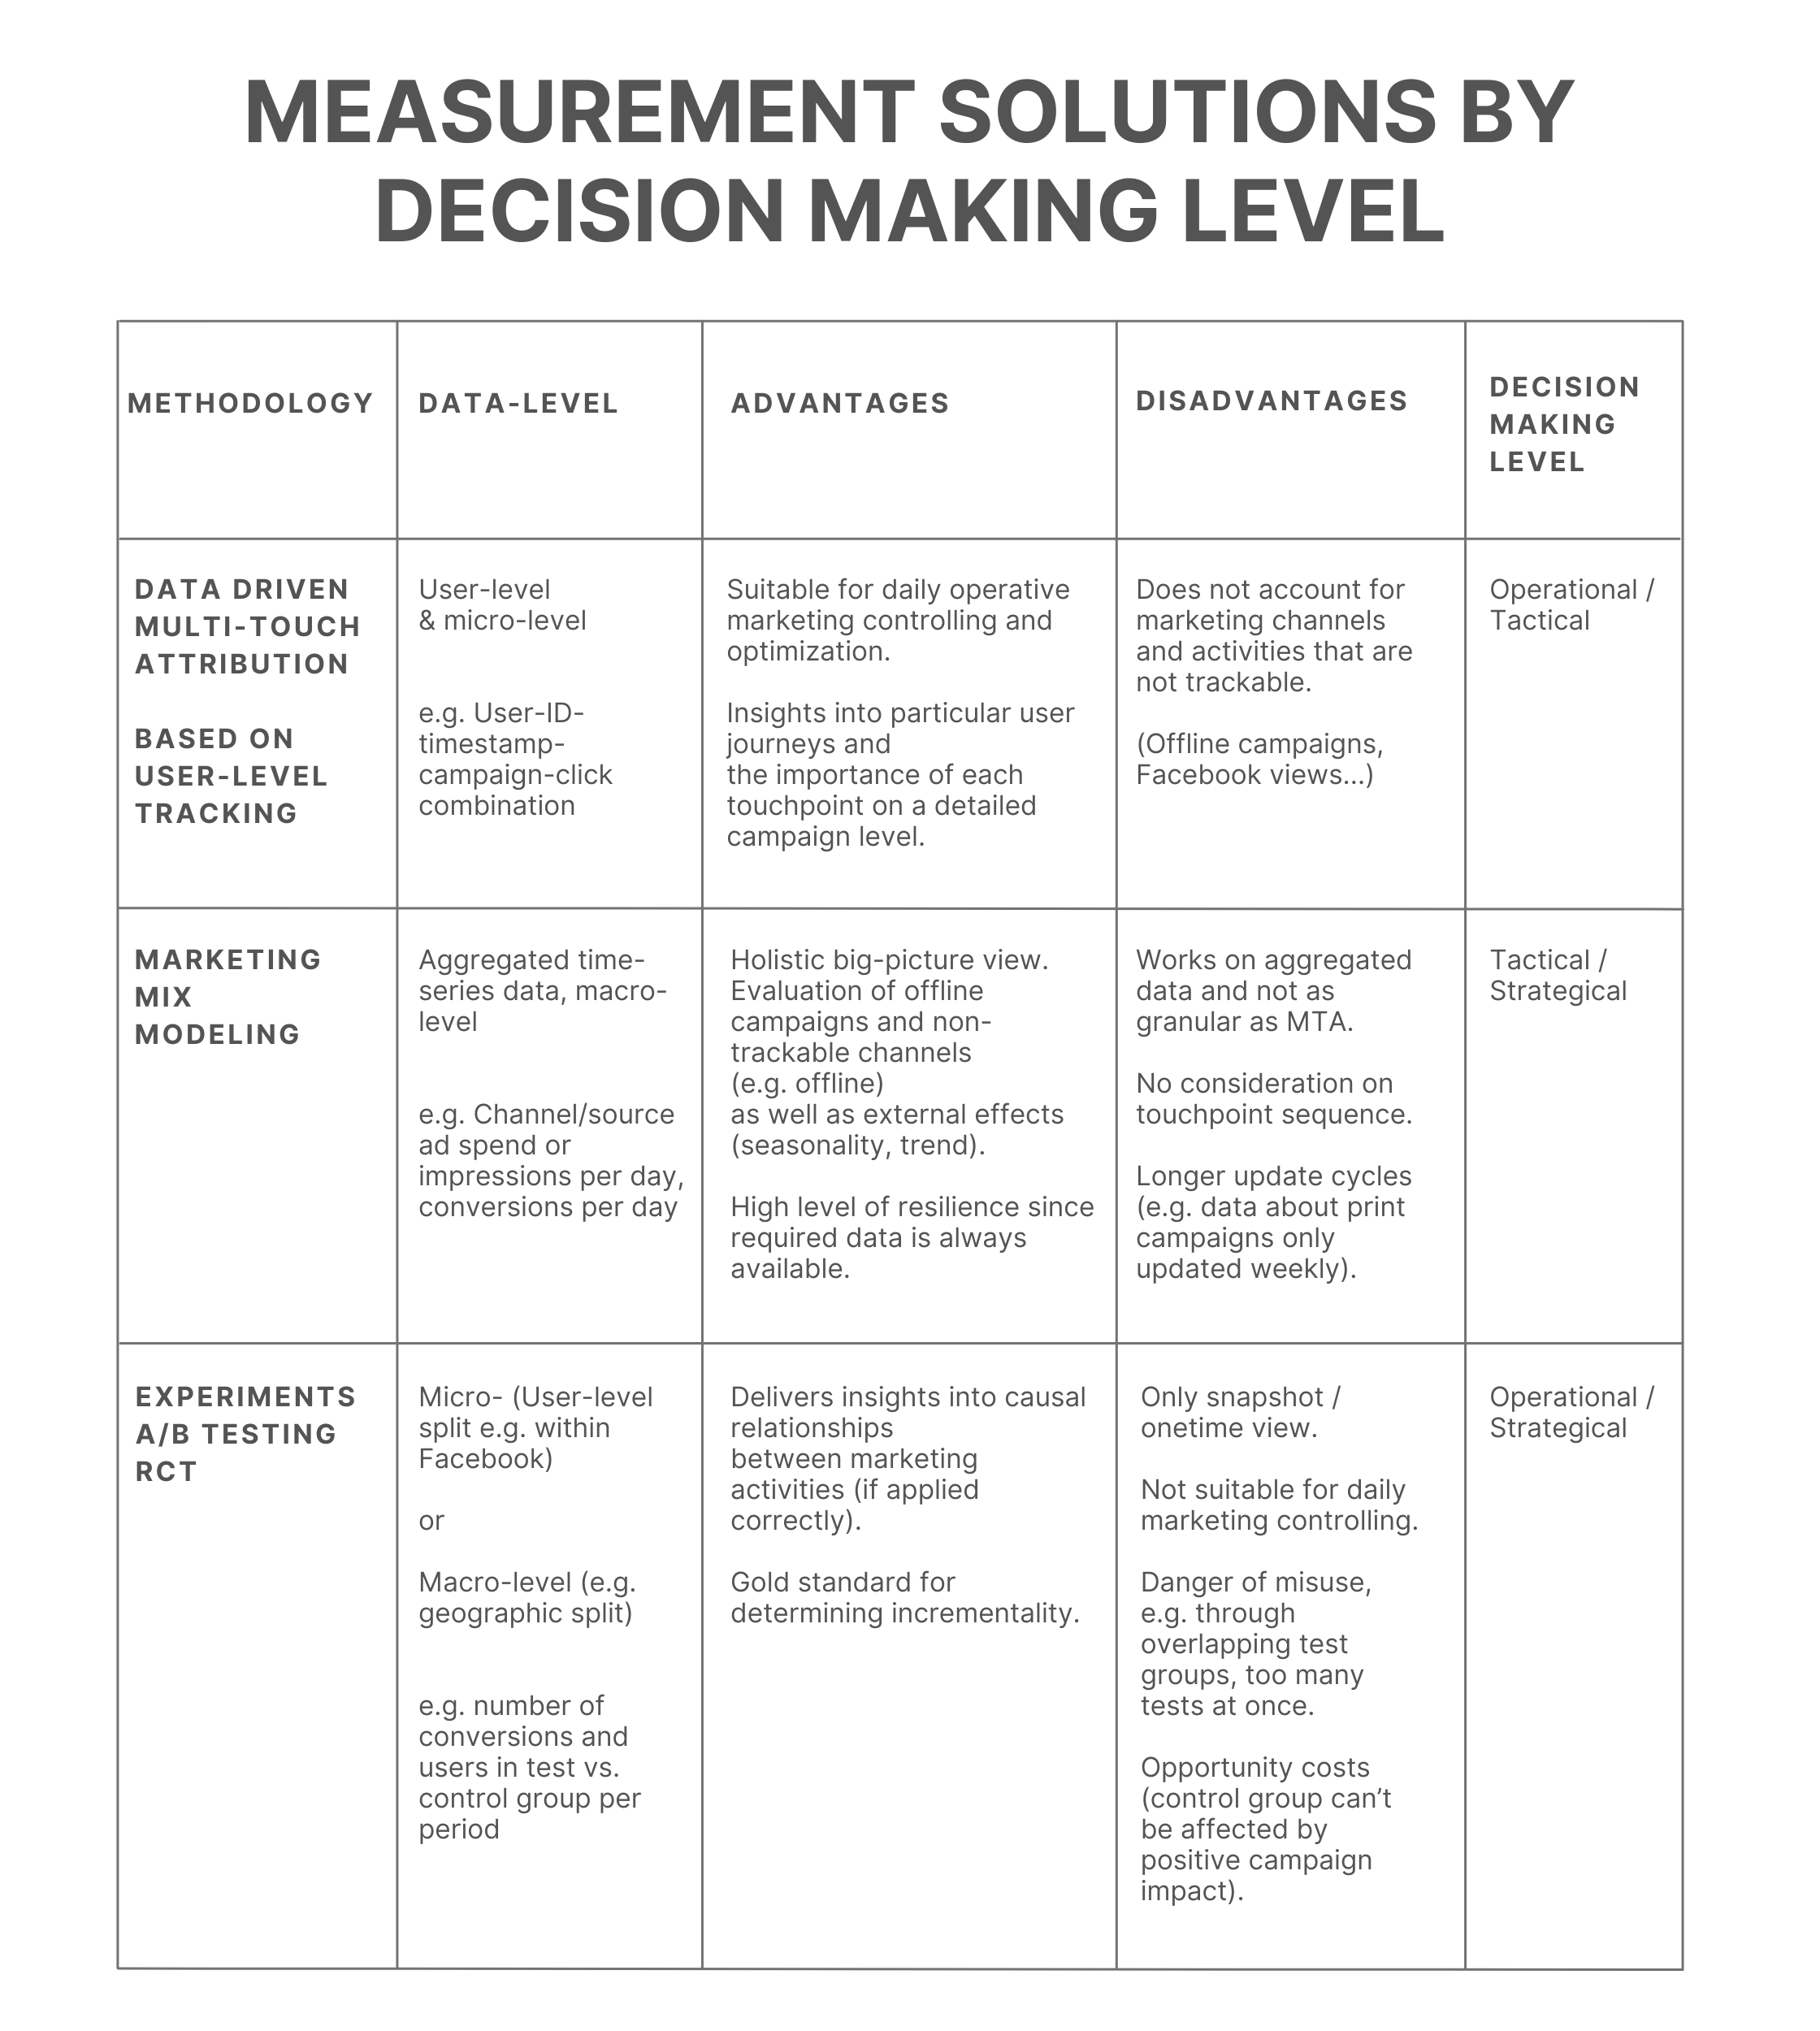 Measurement SolutionS by decision making level